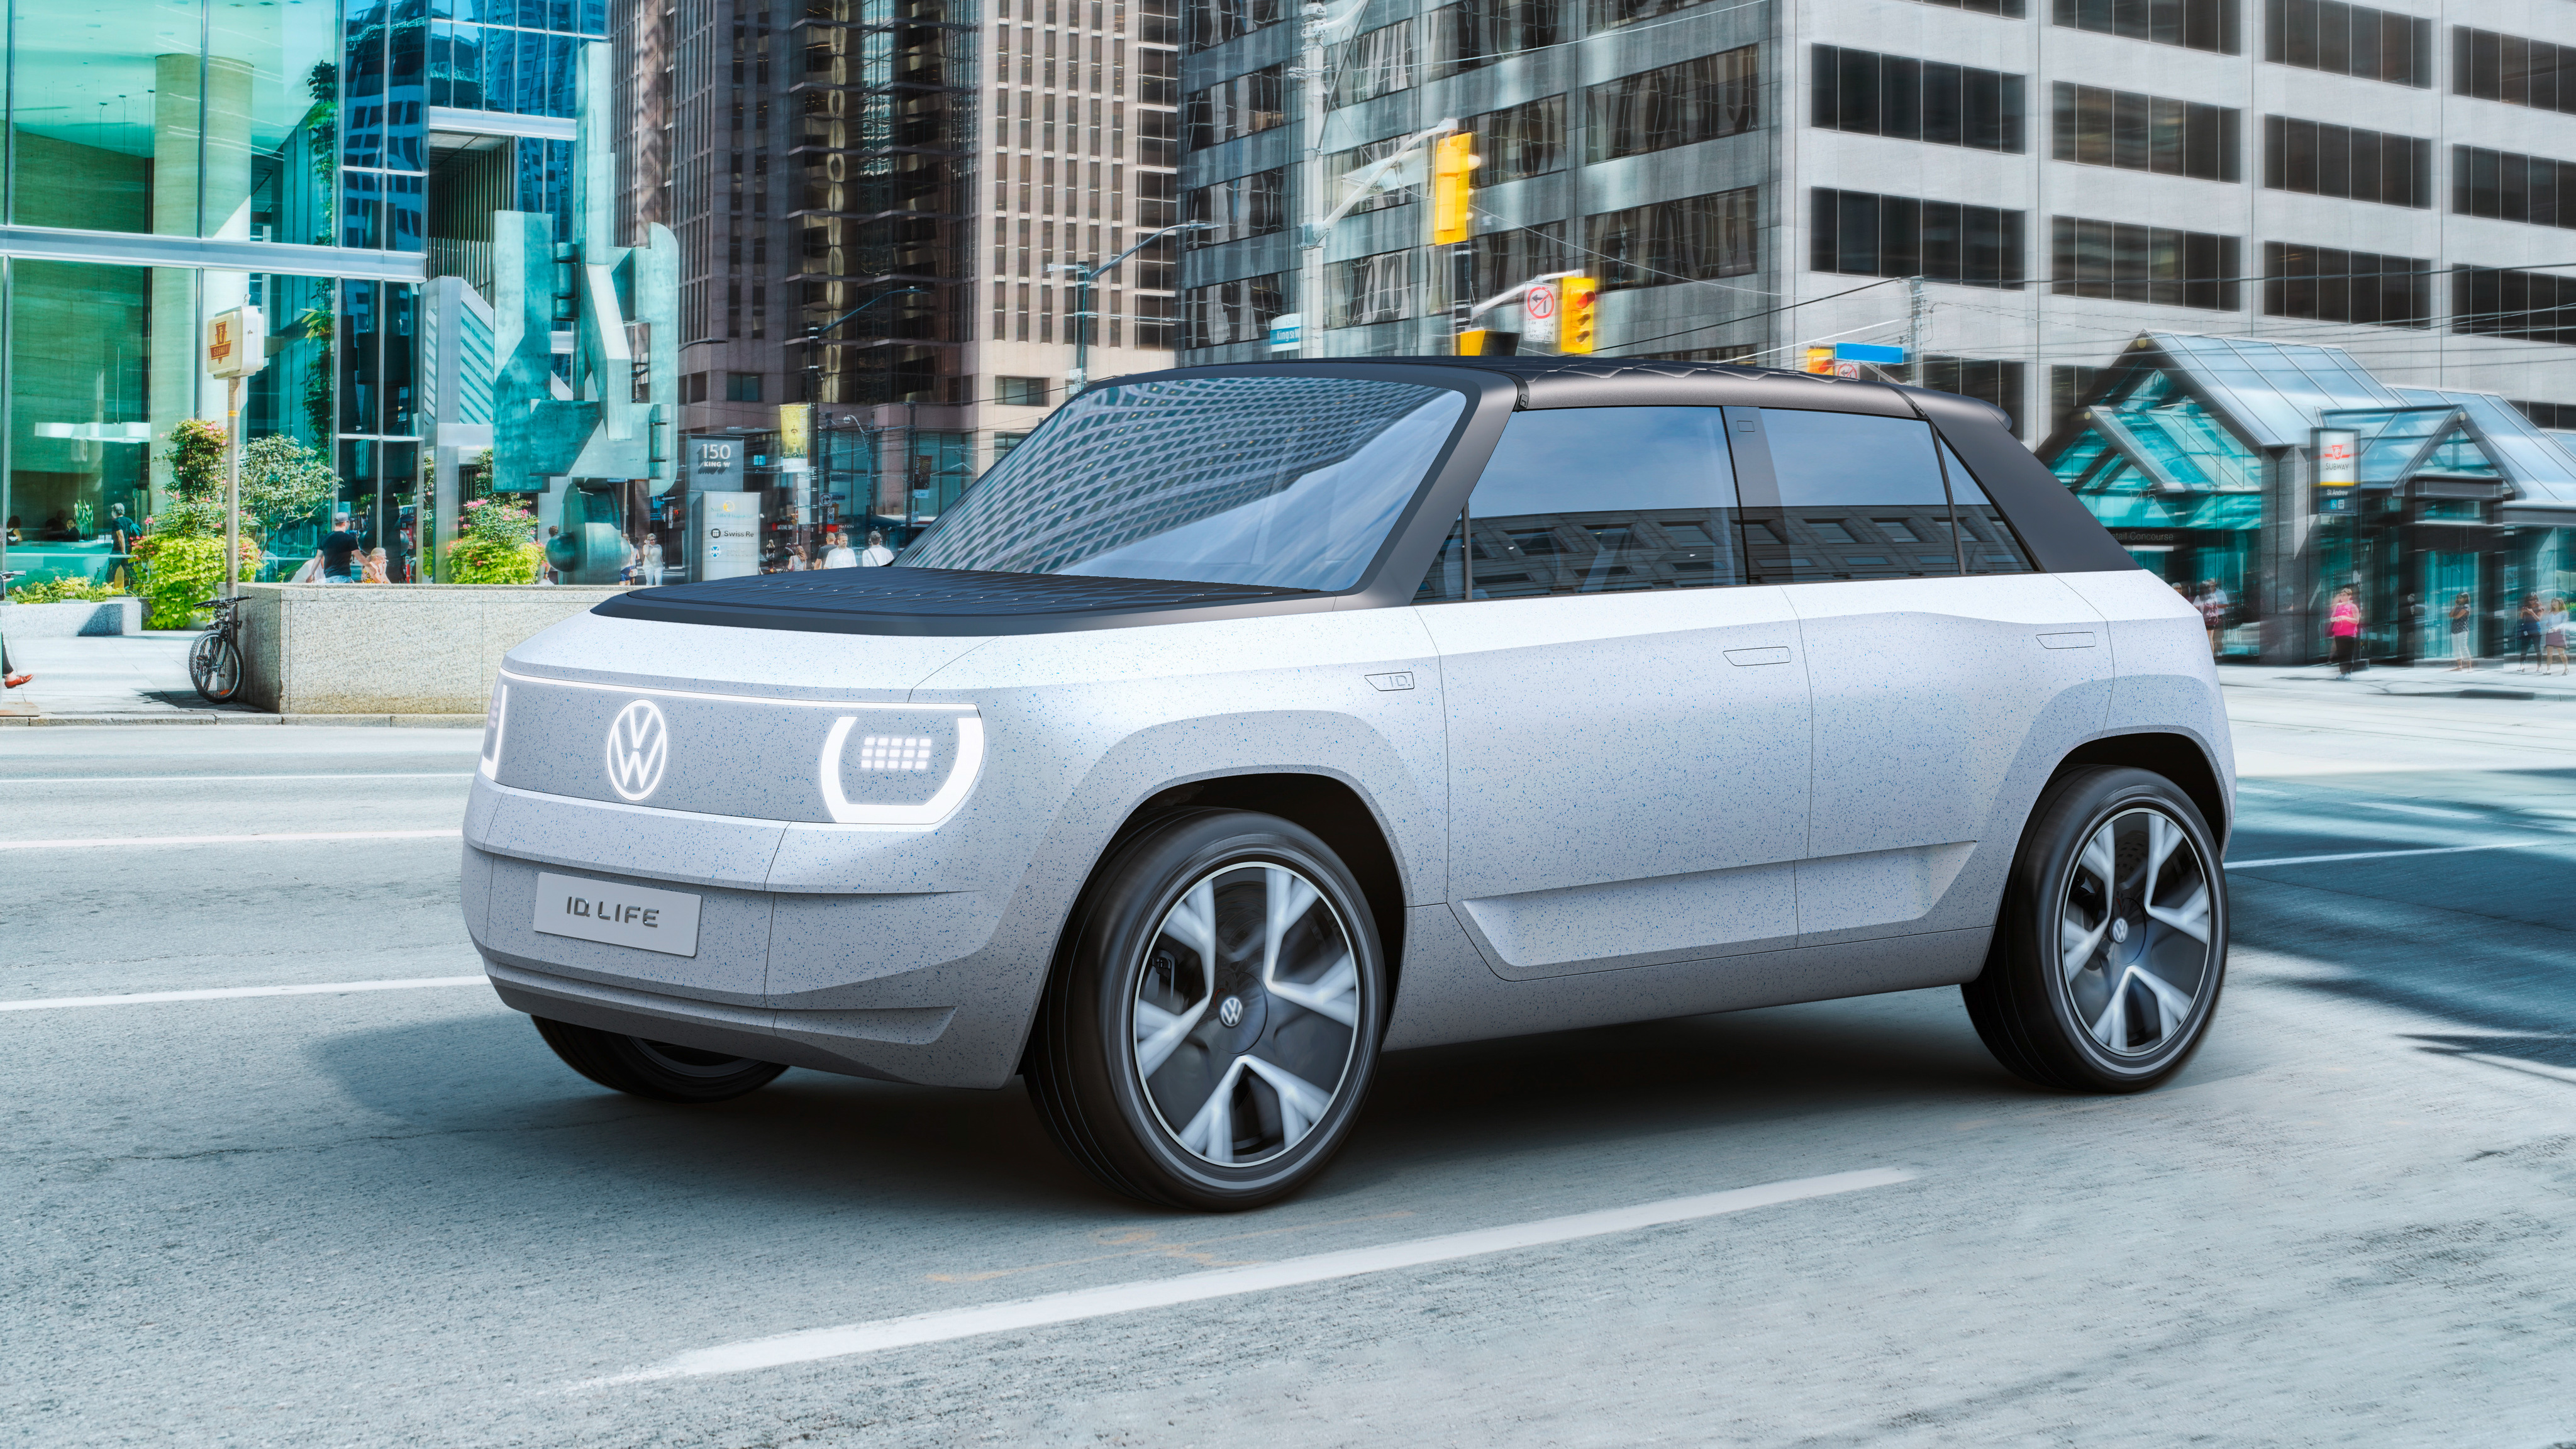 VW says the ID.LIFE concept driving down a street